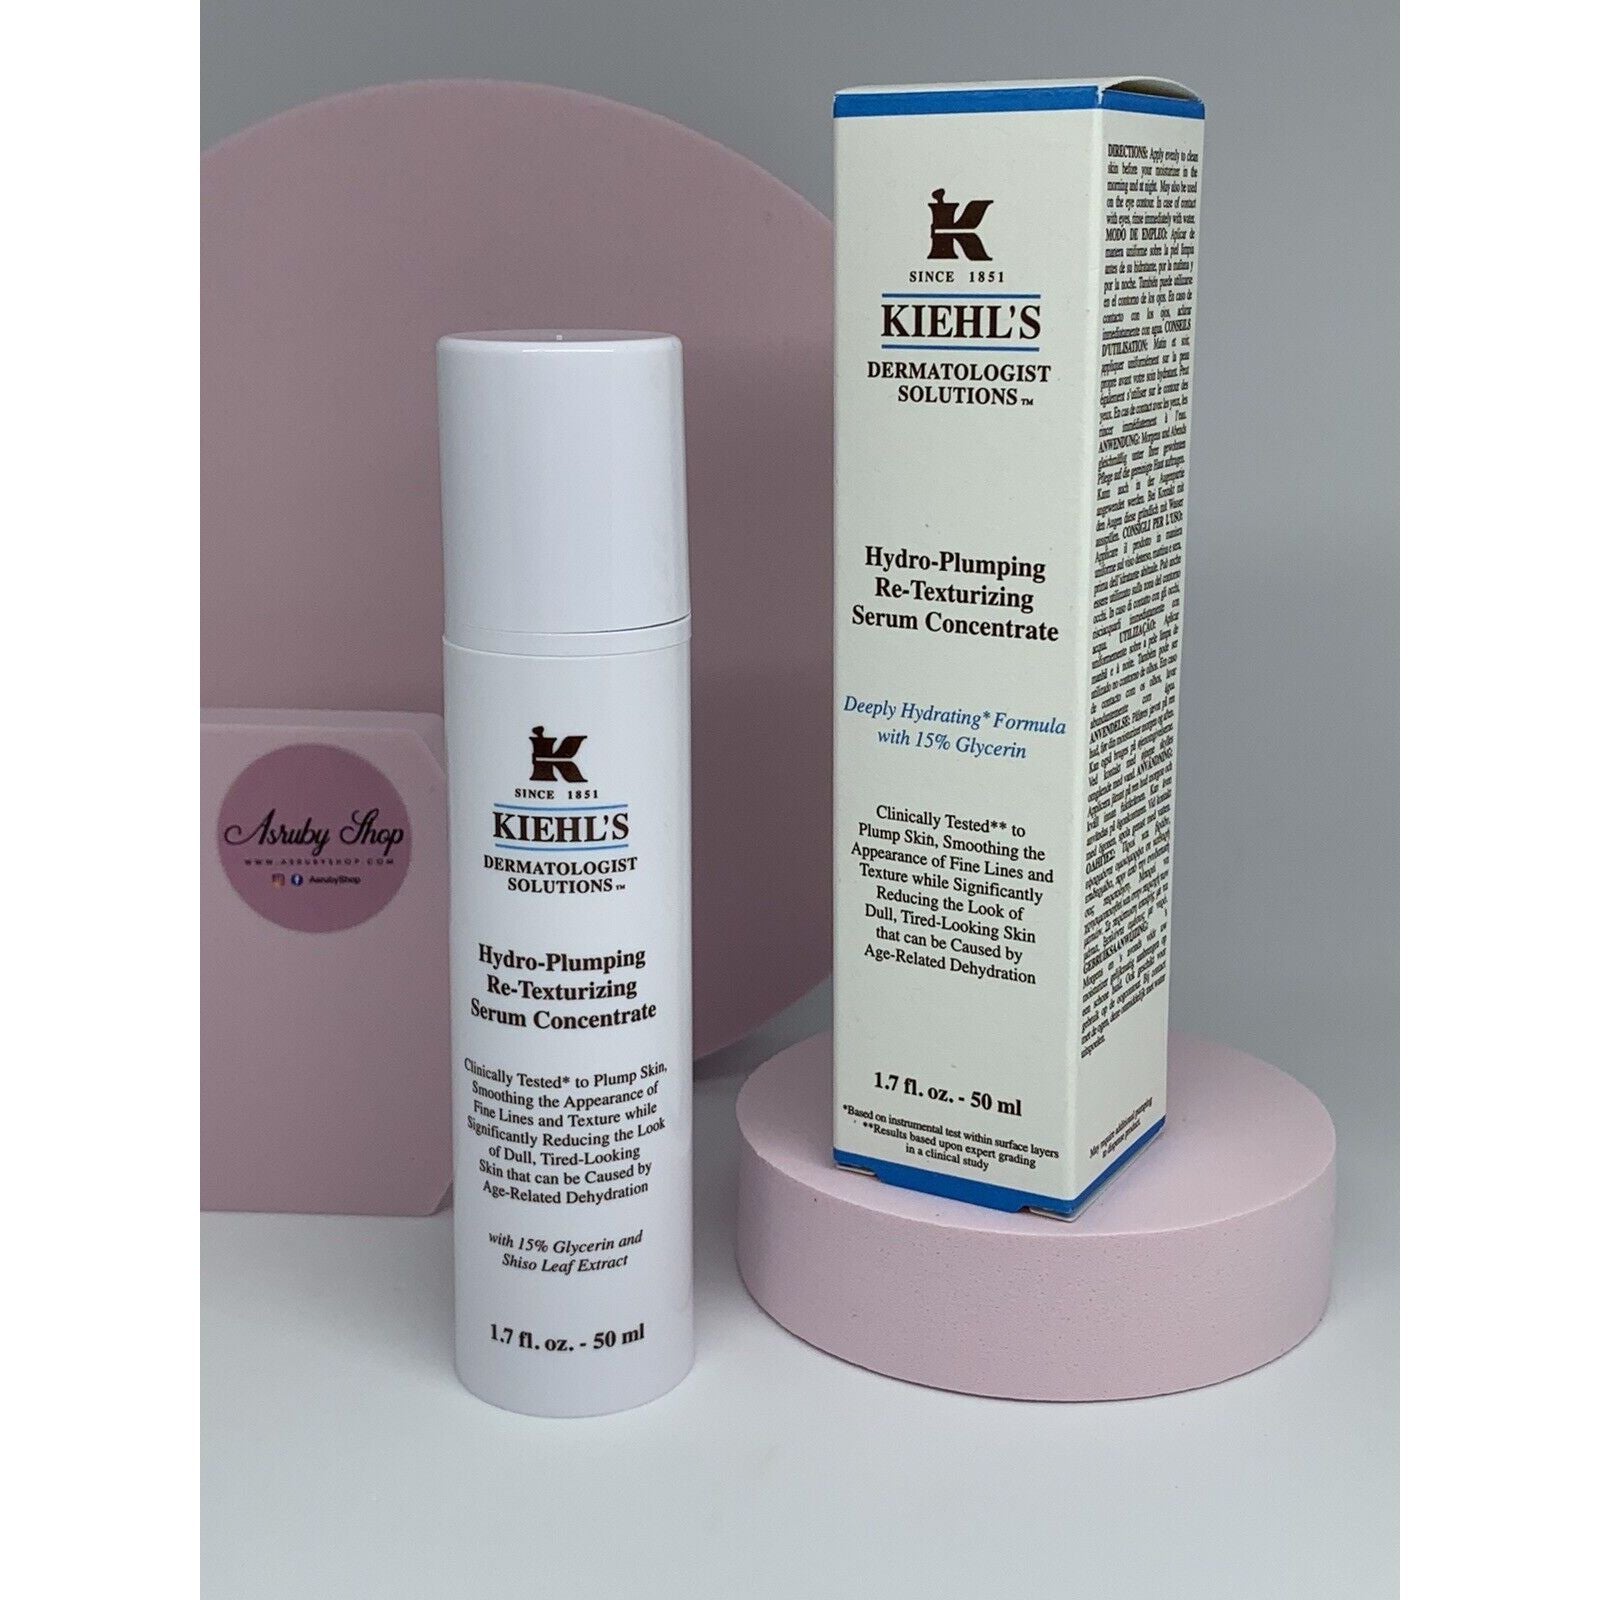 Kiehl's Hydro-Plumping Re-Texturing Serum Concentrate 1.7oz / 50 ml